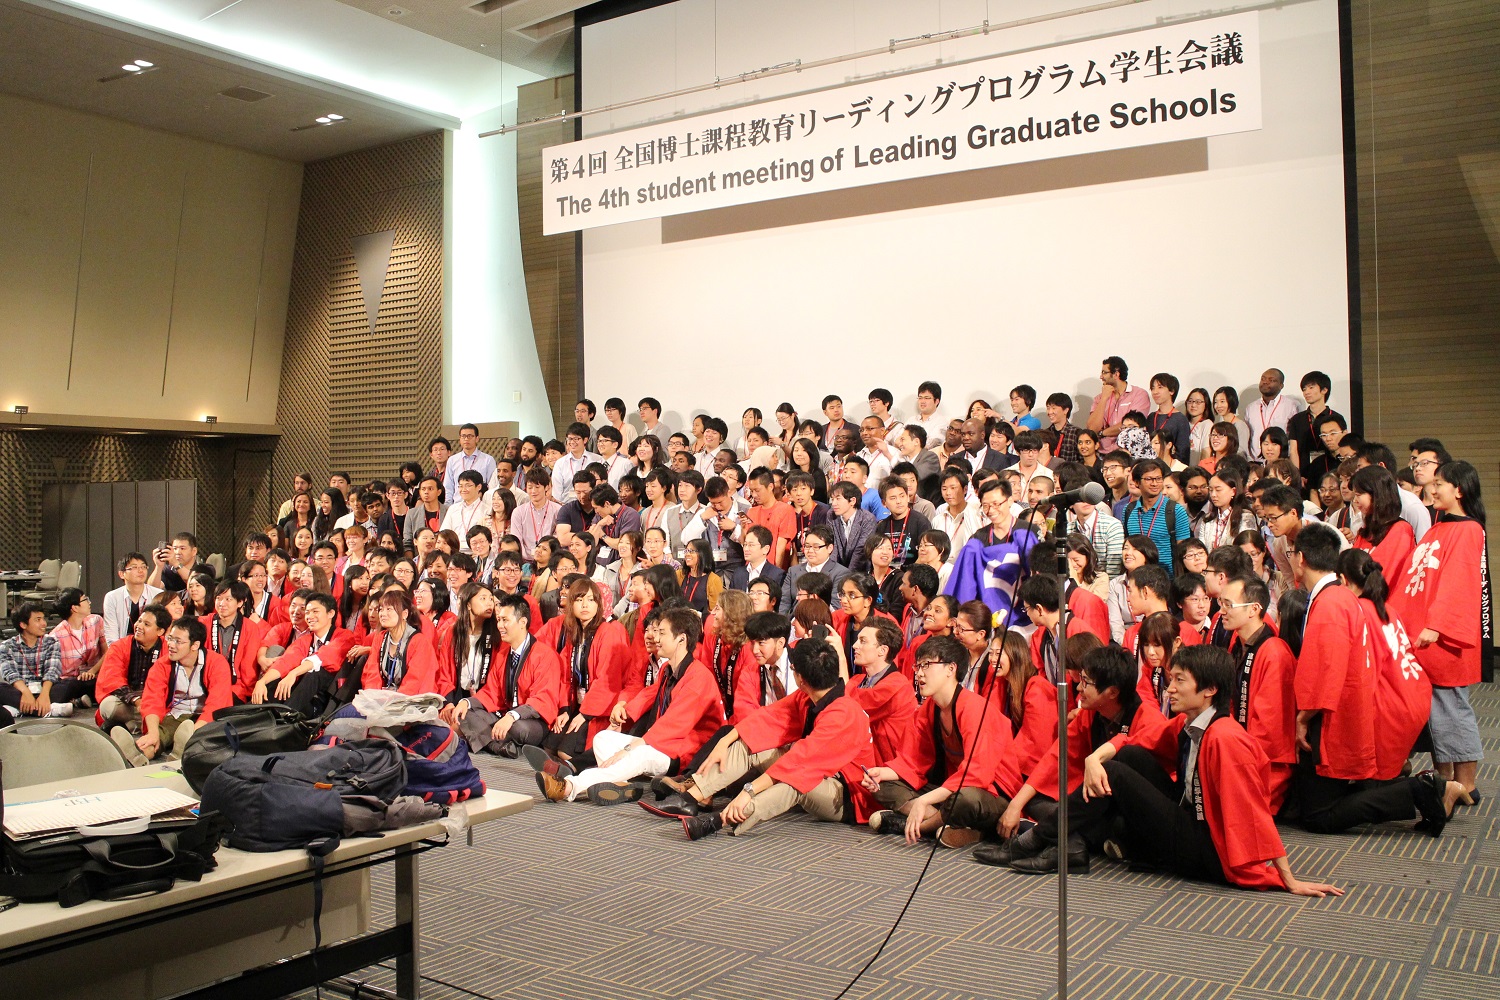 http://www.shinshu-u.ac.jp/project/leading/news/images/4th%20Student%20Meeting%20of%20L.G.S.1.jpg